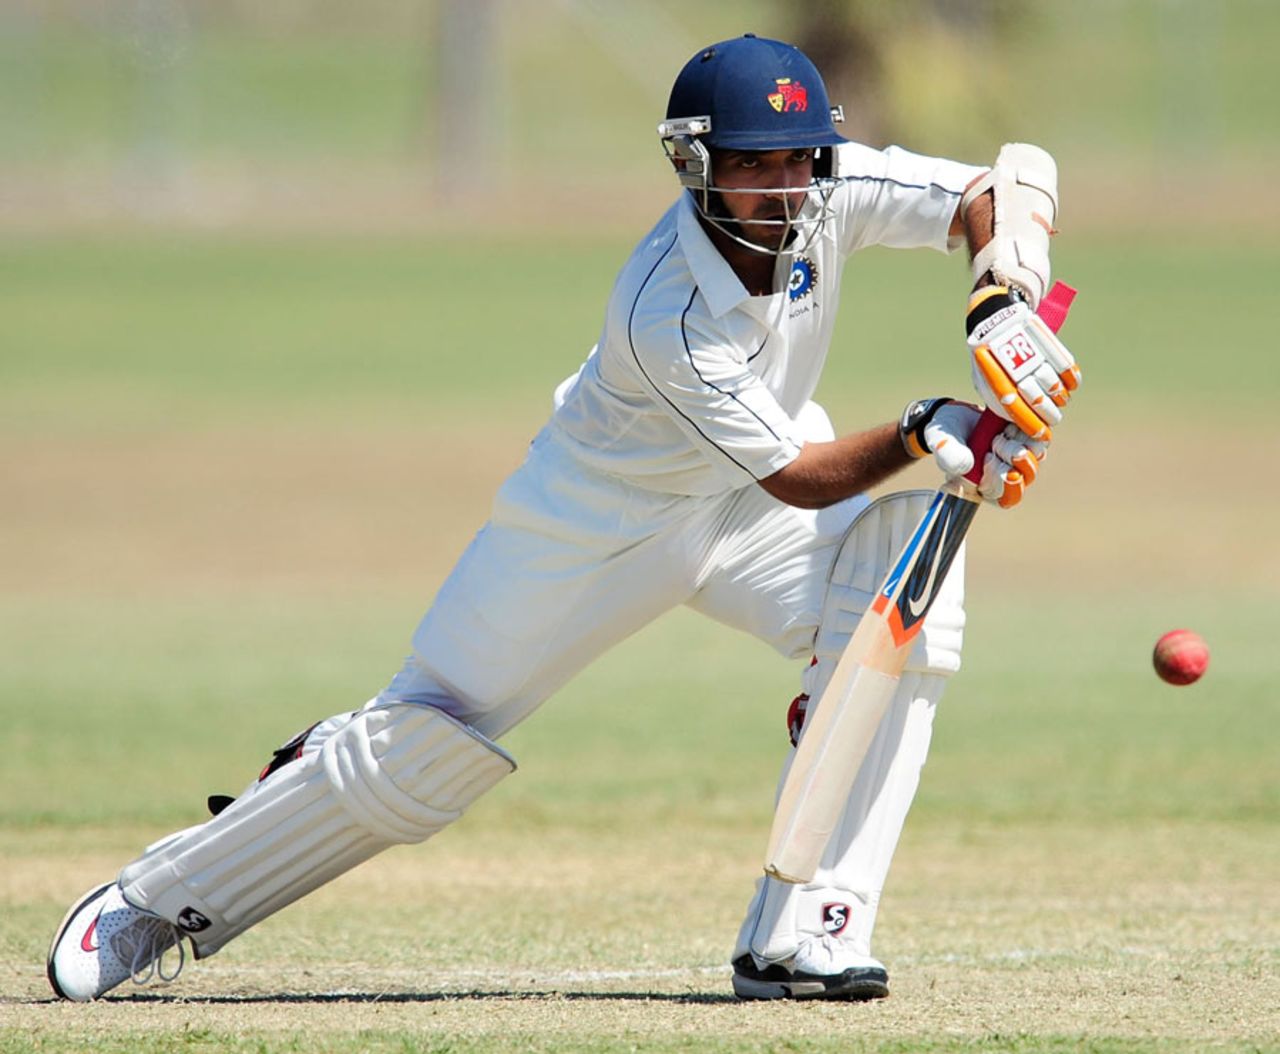 Ajinkya Rahane was one of three centurions, Australian Institute of Sport v India Emerging Players, Emerging Players tournament, 2nd day, Townsville, August 12, 2011